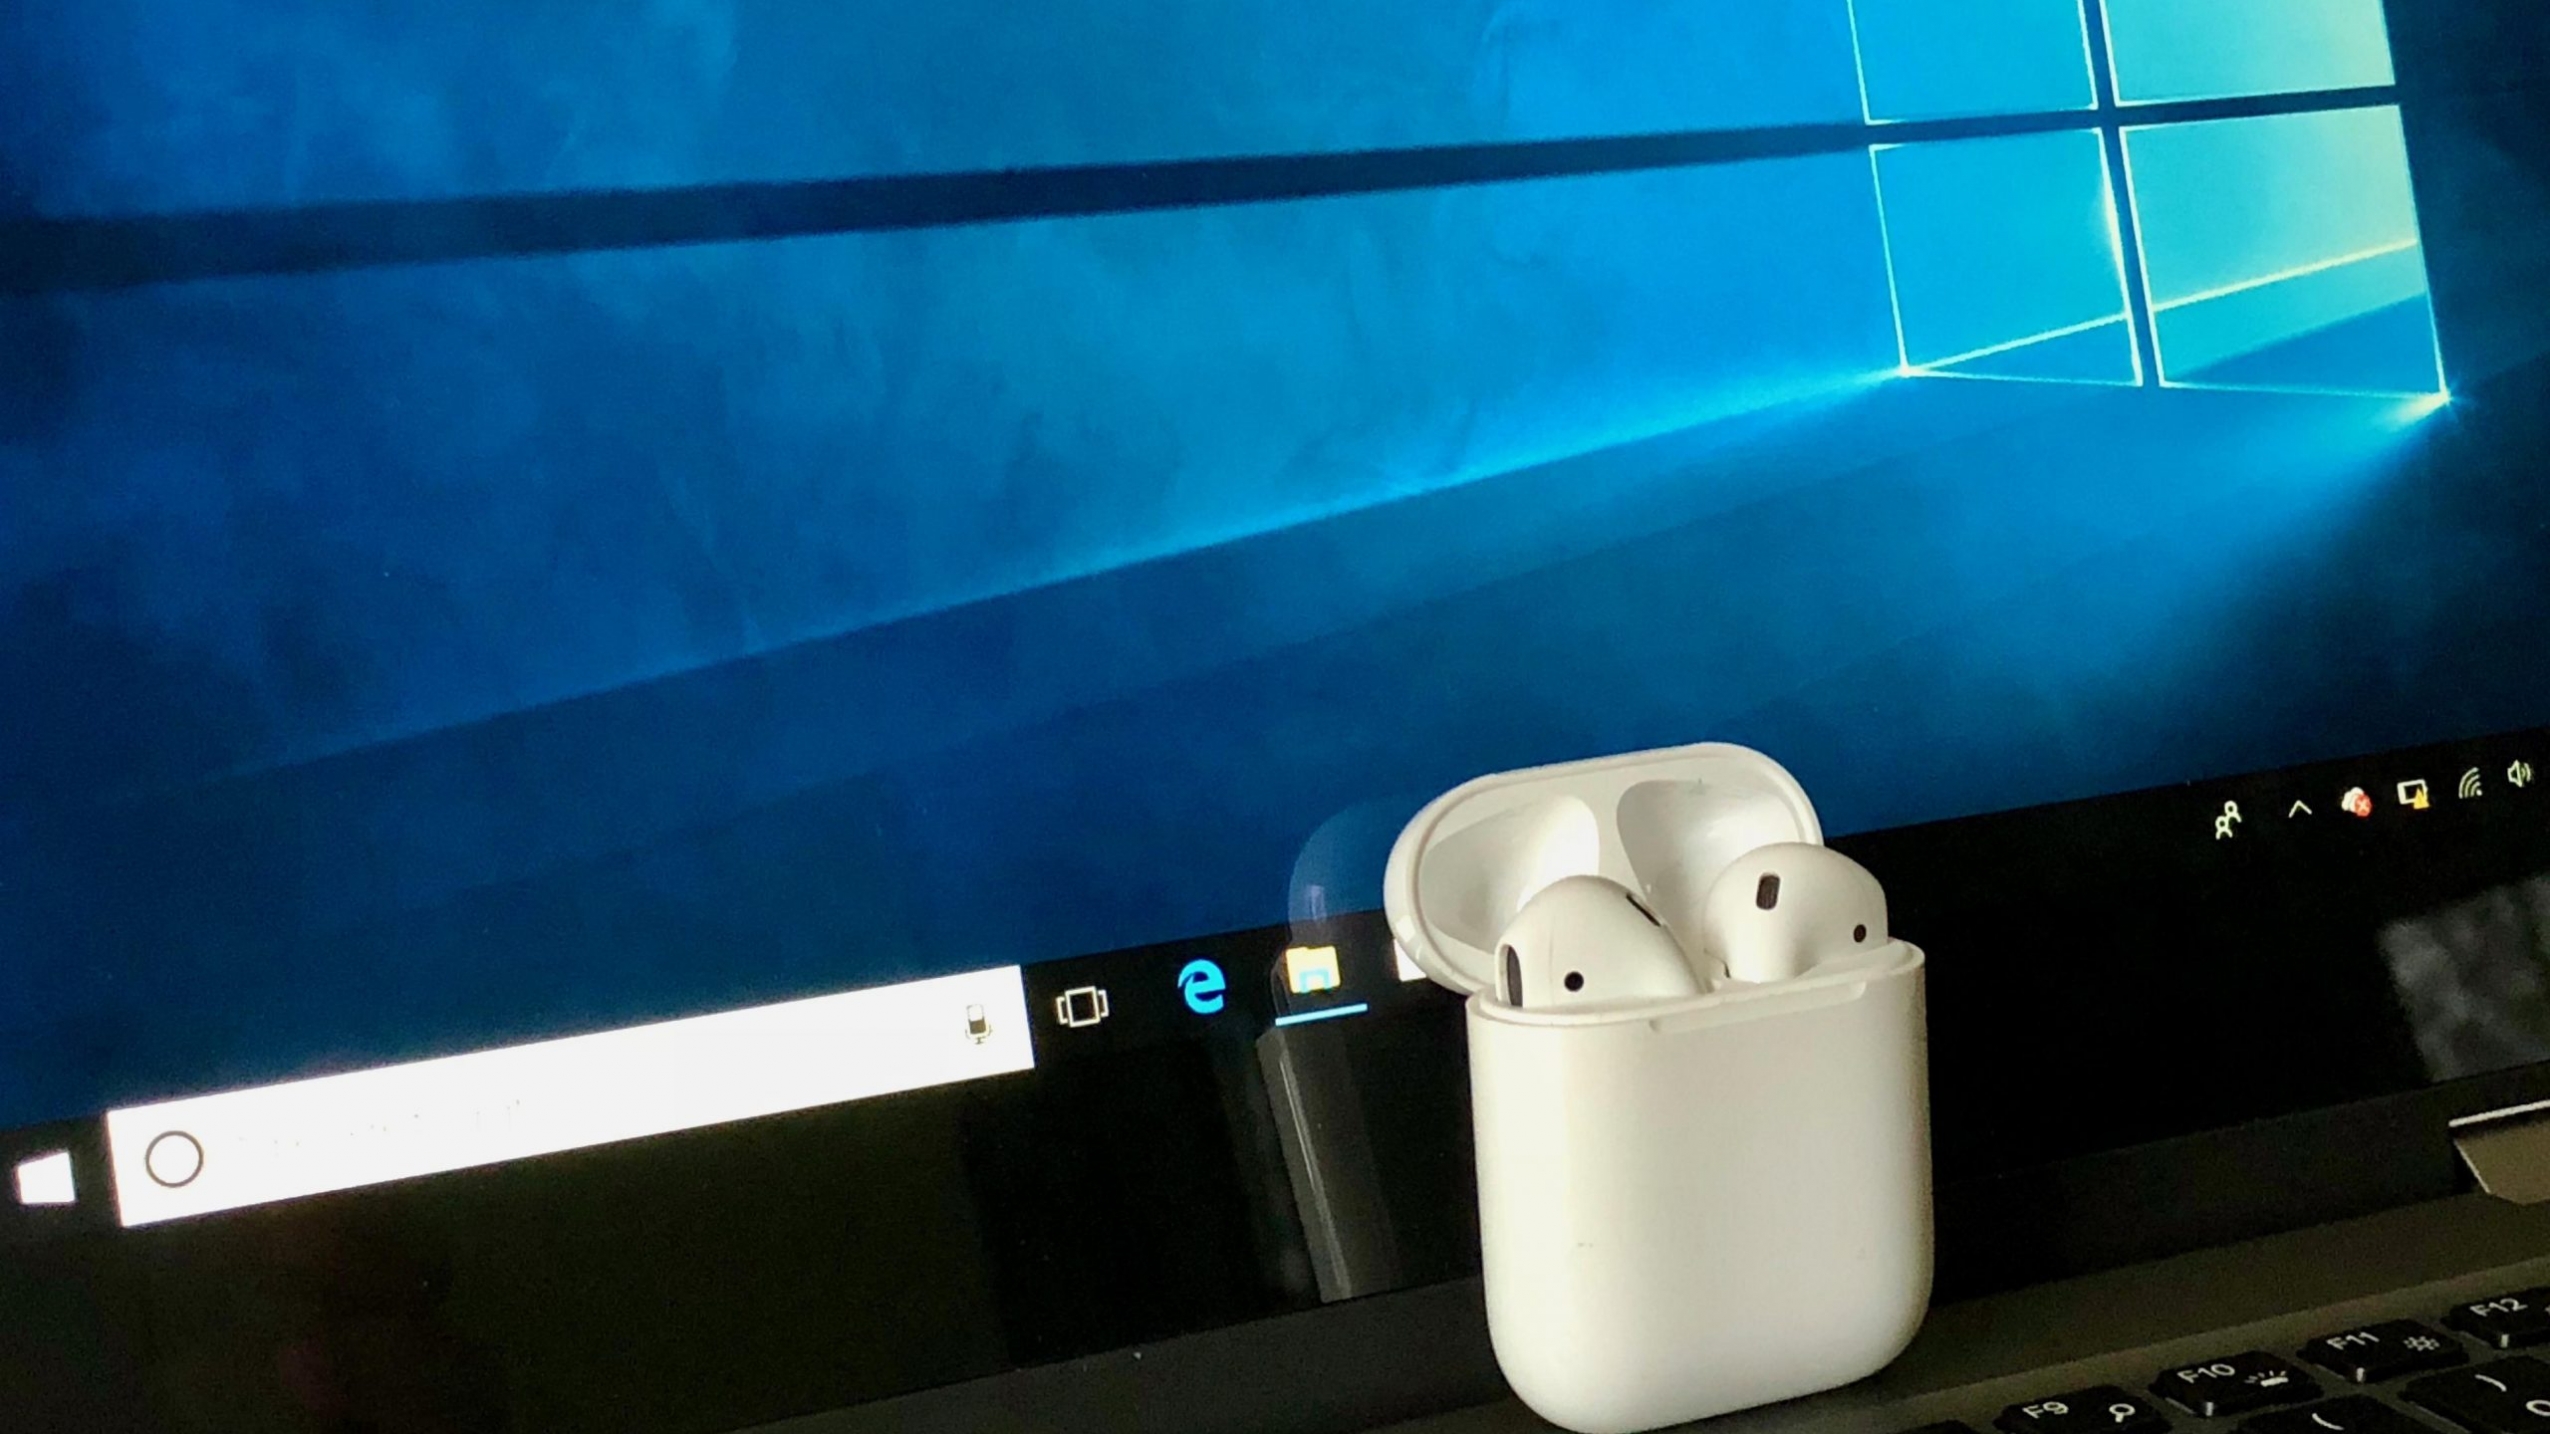 How to connect airpods to windows laptop? web2gb.com